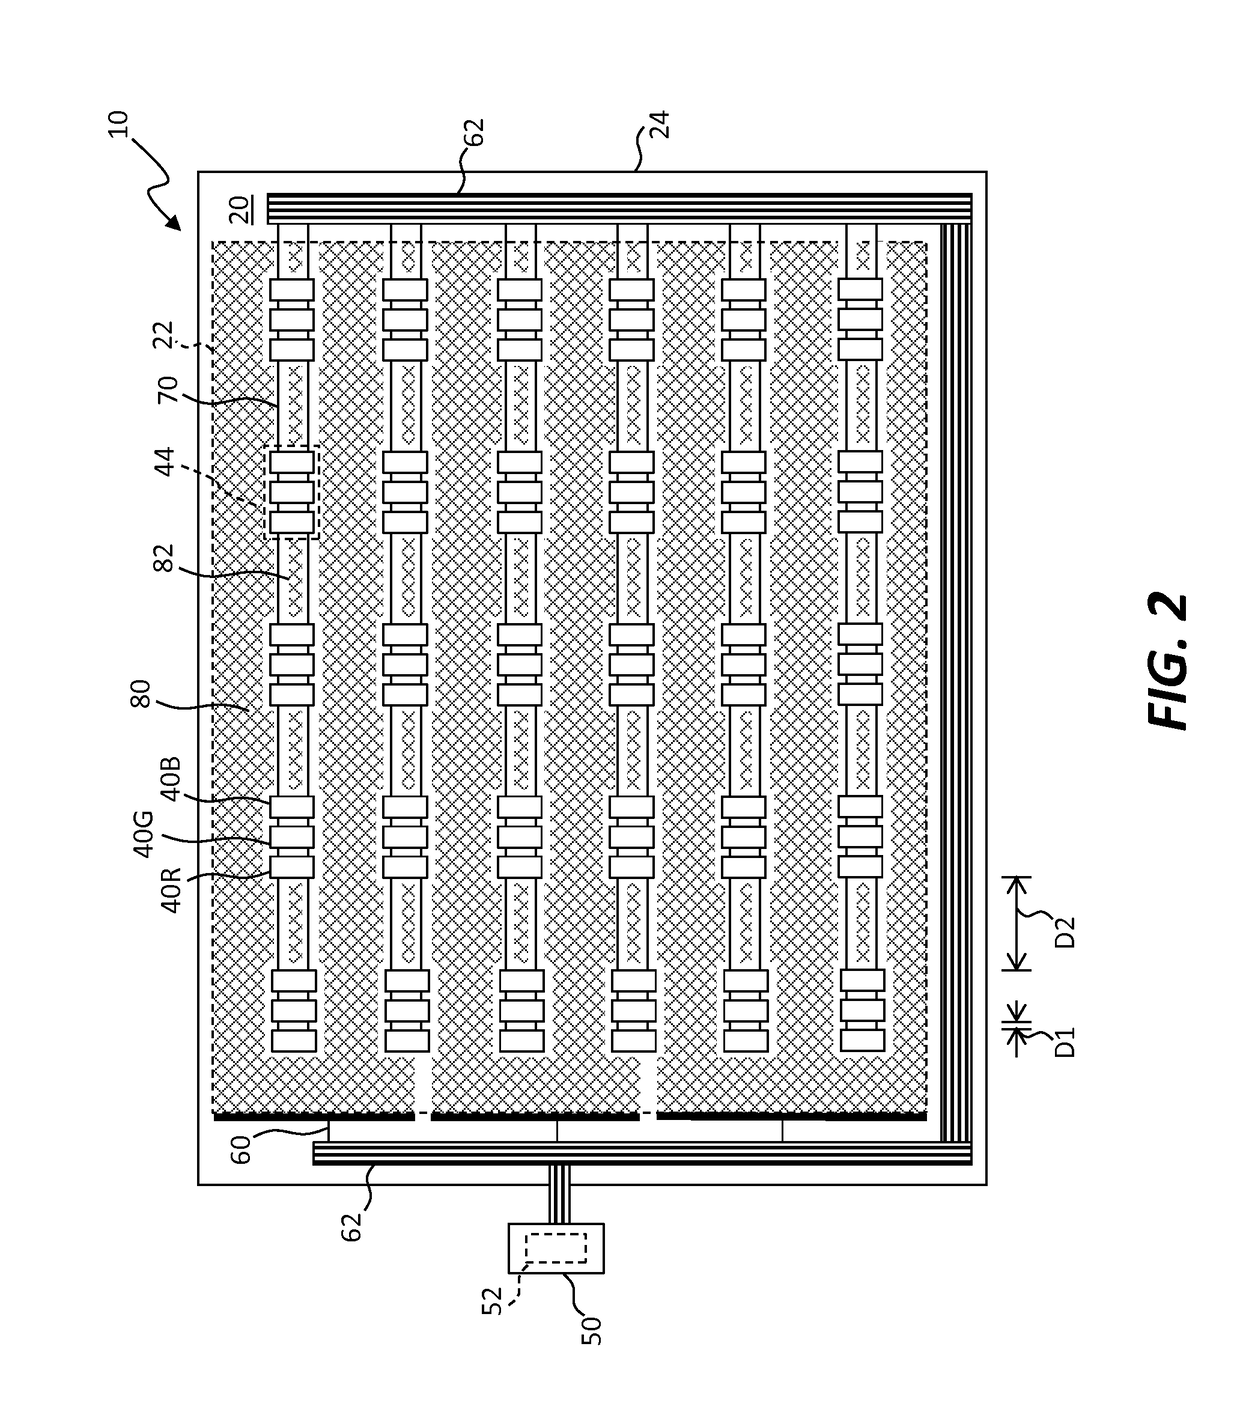 Display with integrated electrodes